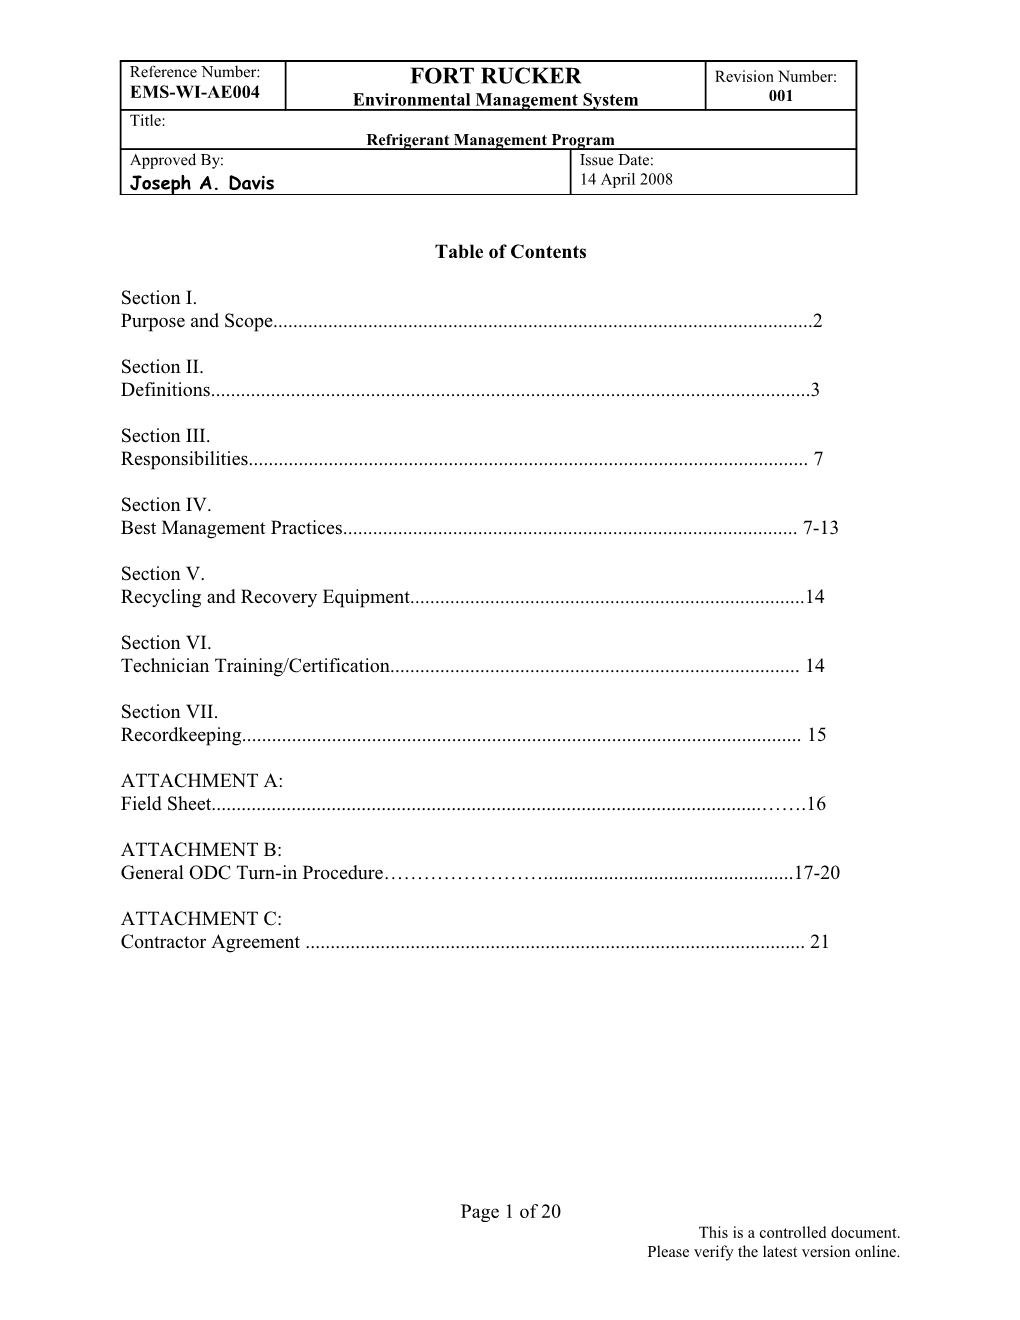 Table of Contents s117